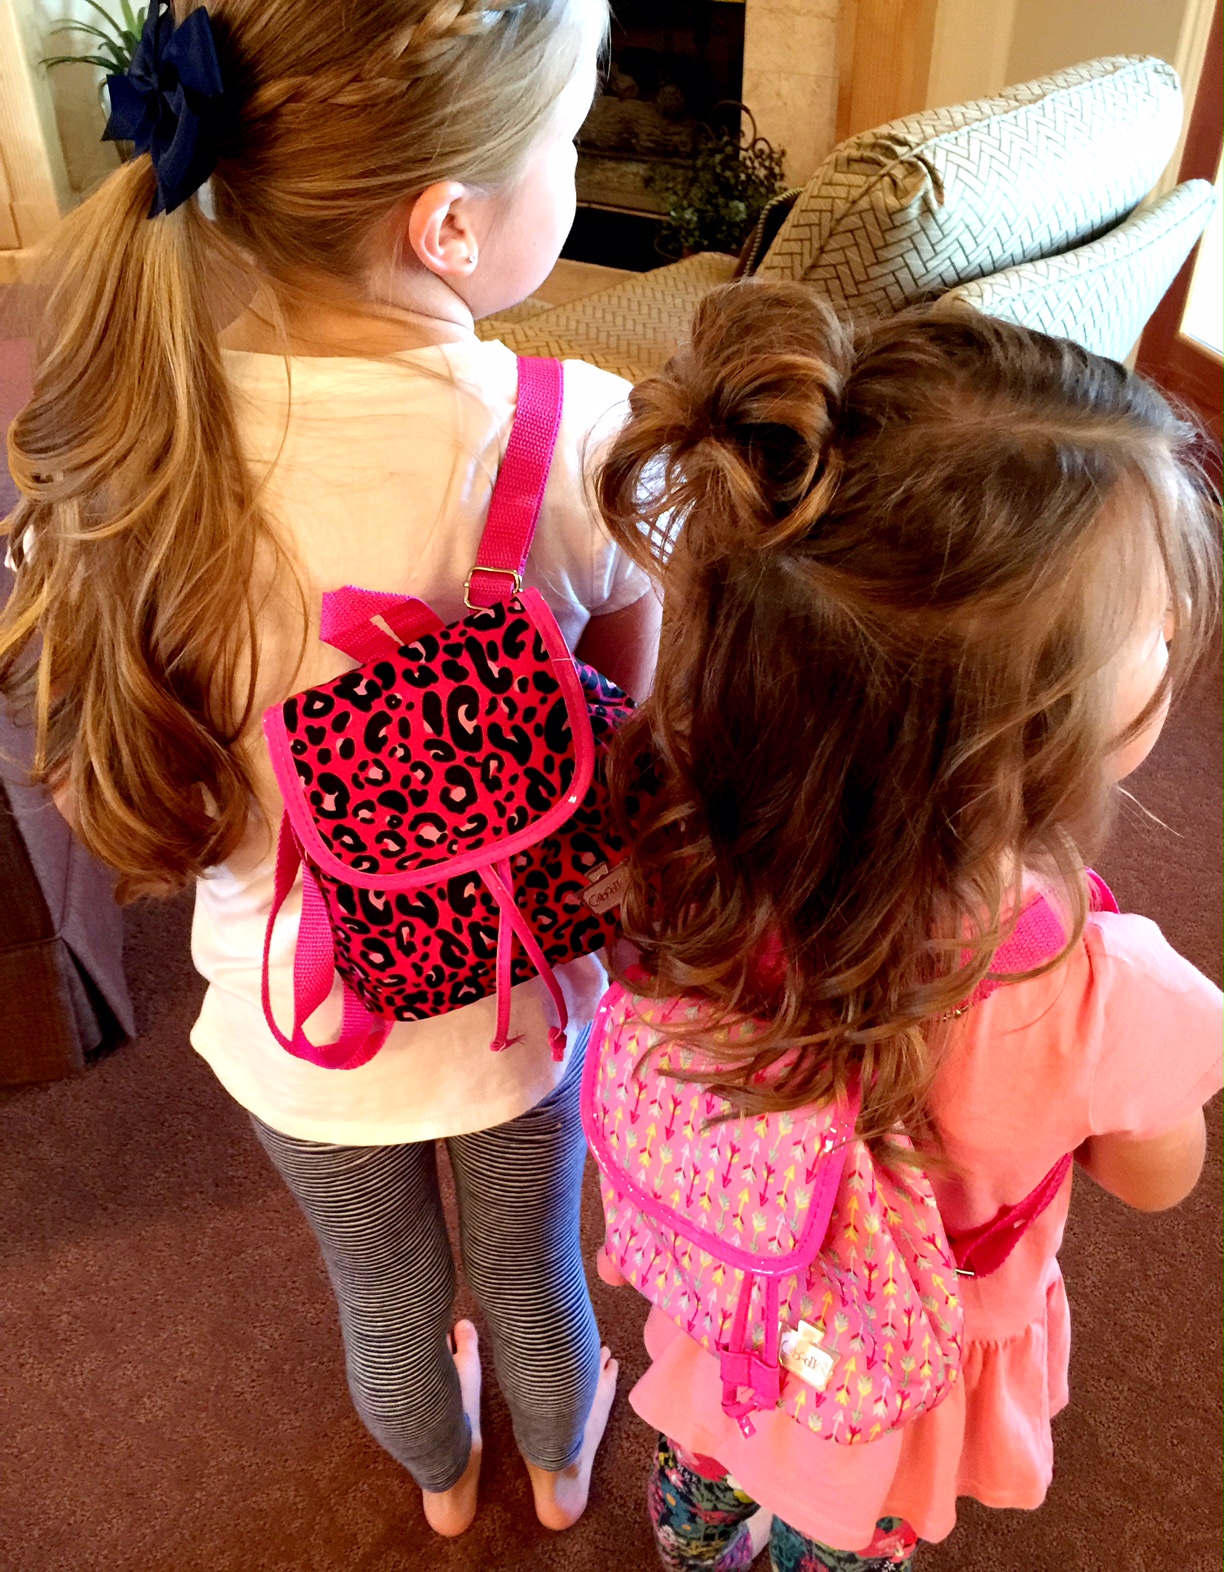 A Few More Of Grandma's Favorite Things...Caboodle backpacks.